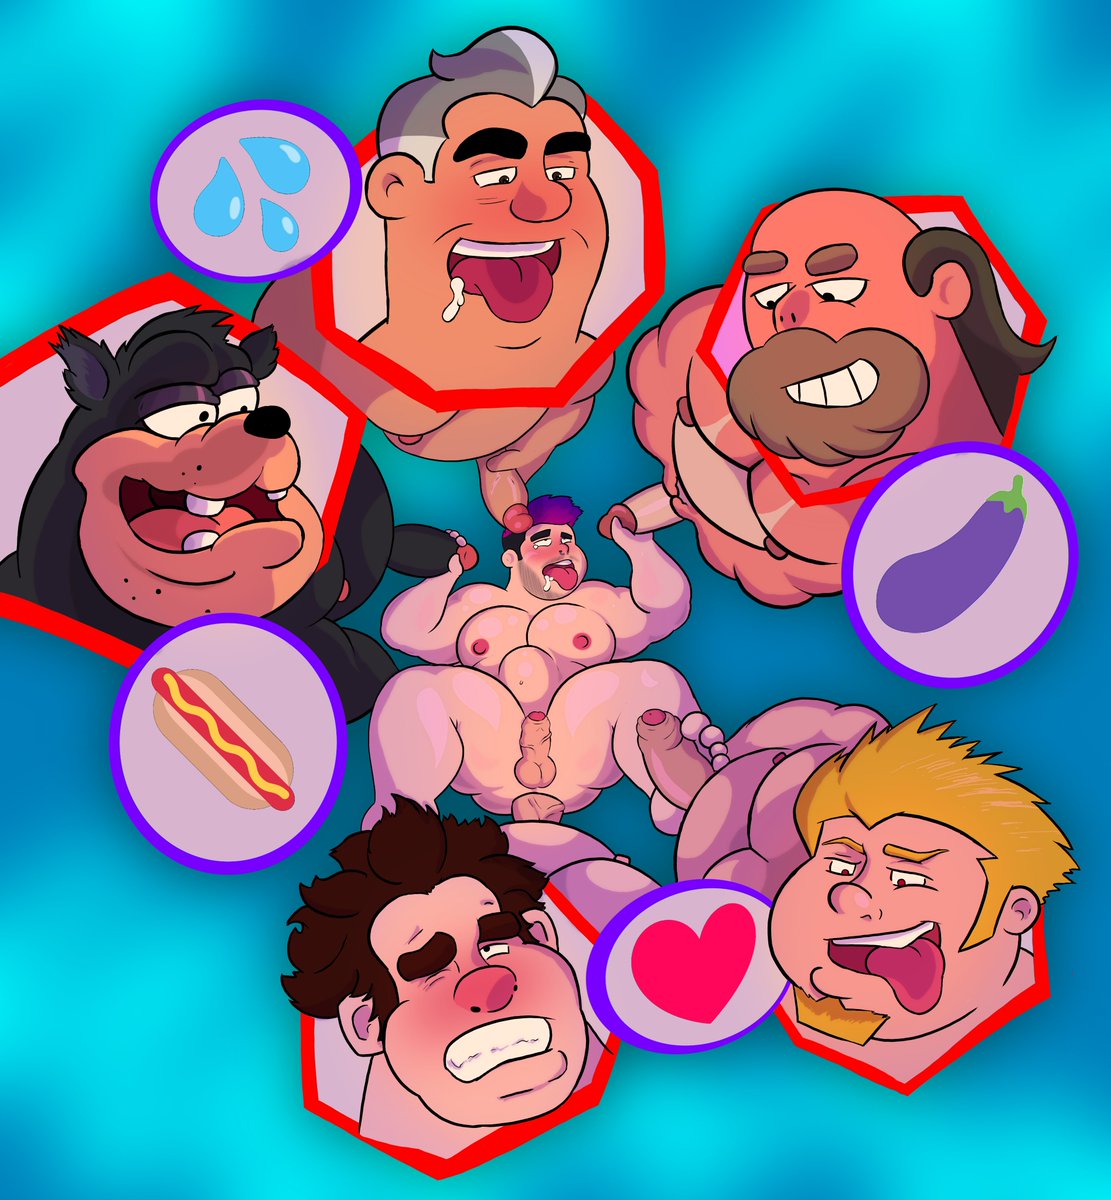 commissioned by @piggyslutboy of himself surrounded by a bunch of daddies in need of release #gay #bara #pete #coop #megasxlr #gooftroop #maxtennyson #WreckItRalph #greguniverse